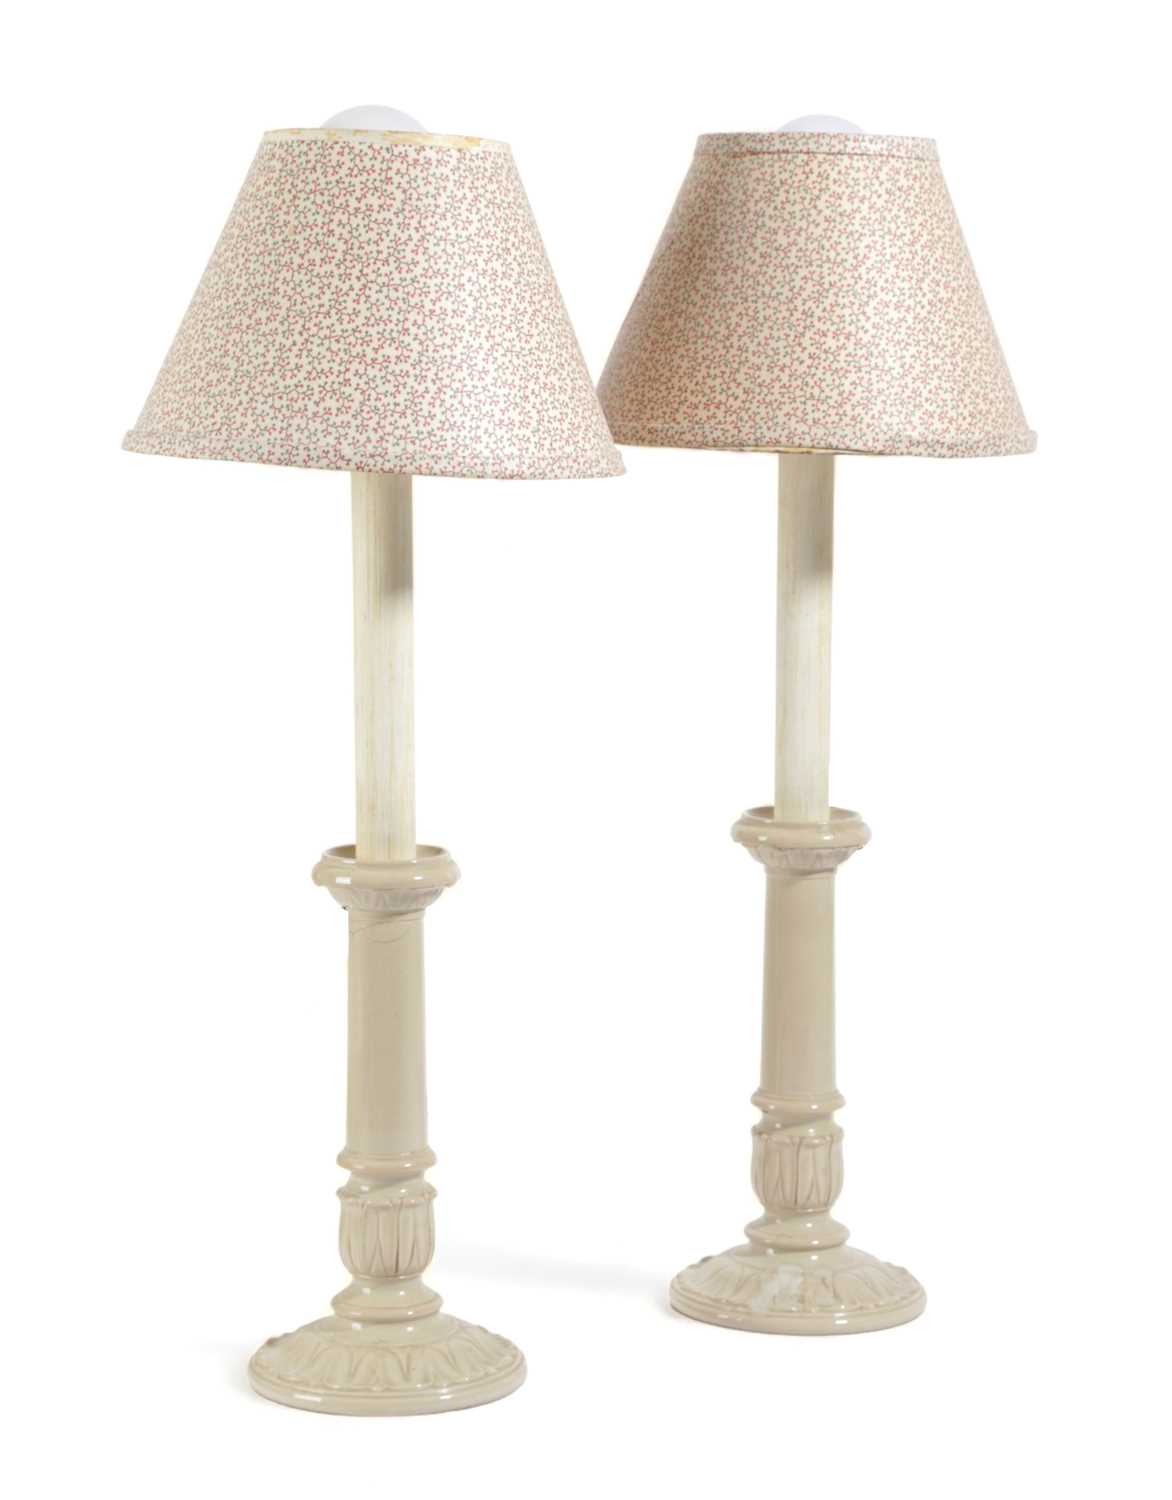 A PAIR OF CERAMIC CANDLESTICK TABLE LAMPS 20TH CENTURY each with a tapering stem above a stiff